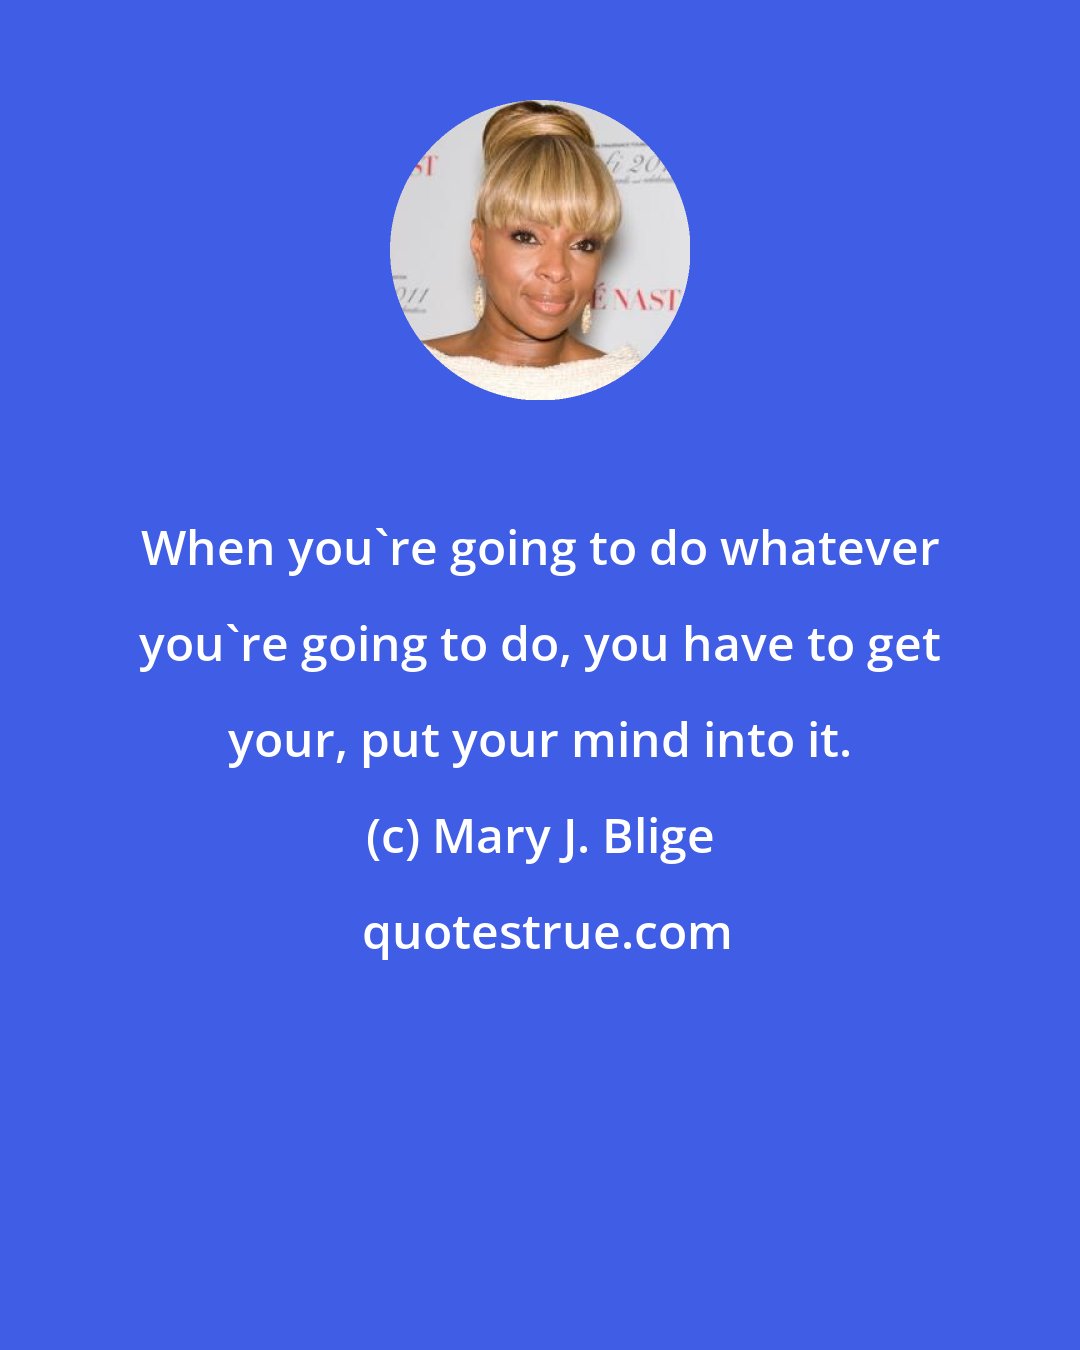 Mary J. Blige: When you're going to do whatever you're going to do, you have to get your, put your mind into it.